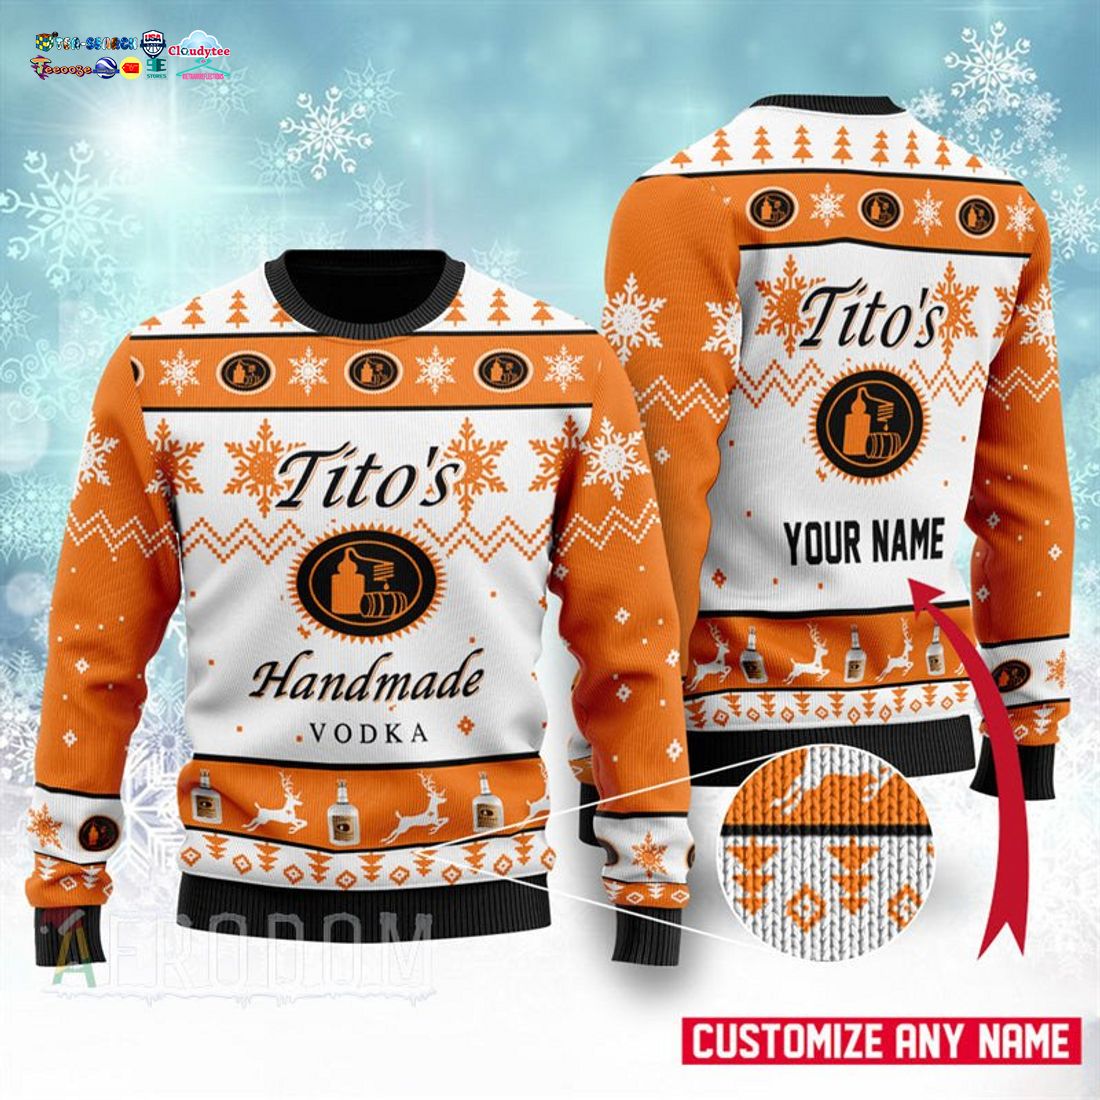 Personalized Name Tito's Handmade Vodka Ver 1 Ugly Christmas Sweater